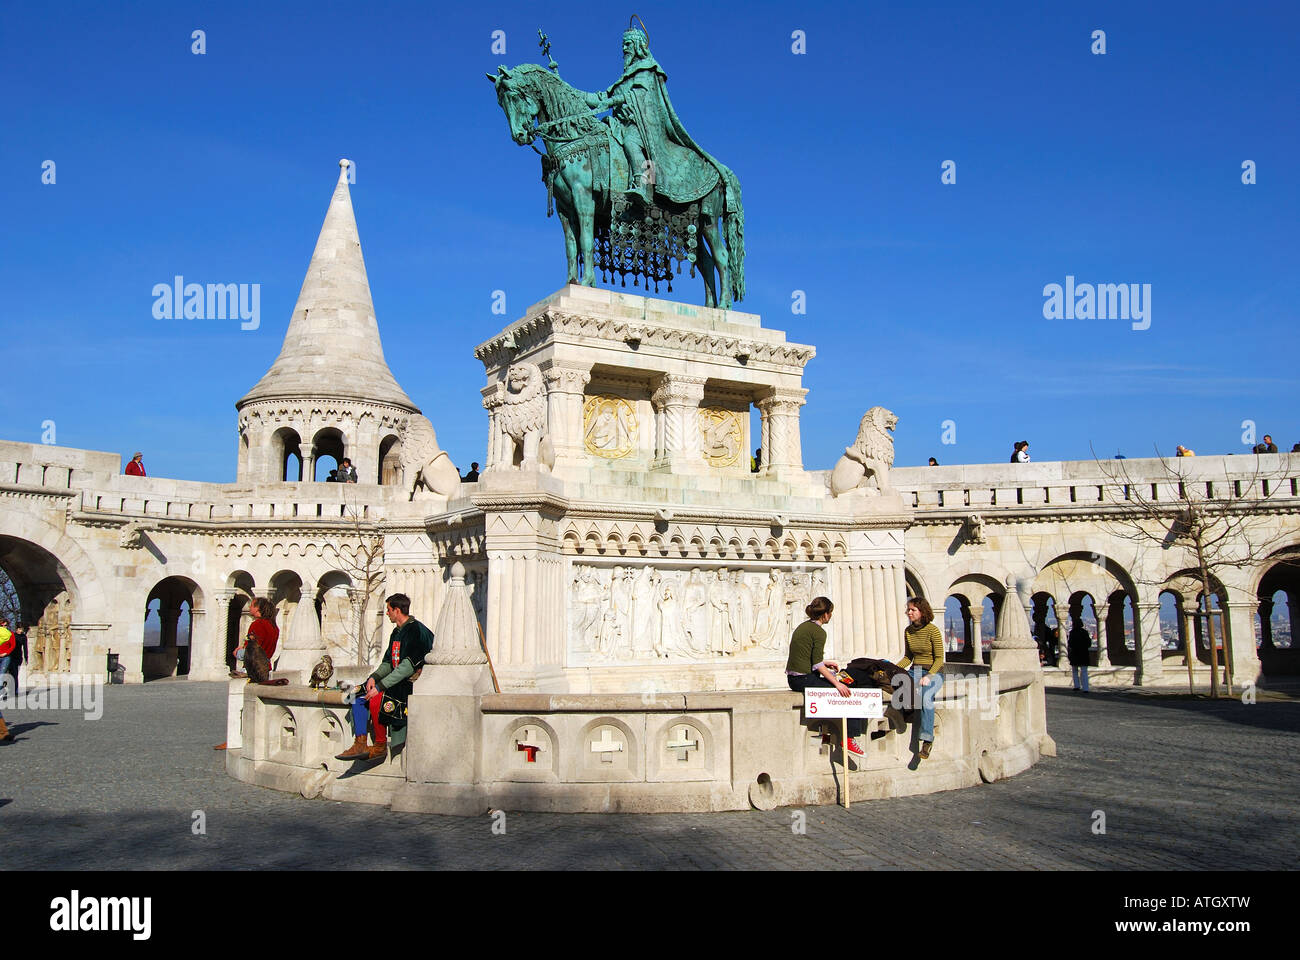 St.Stephen's statue and ramparts, Fisherman's Bastion, The Castle District, Buda, Budapest, Republic of Hungary Stock Photo